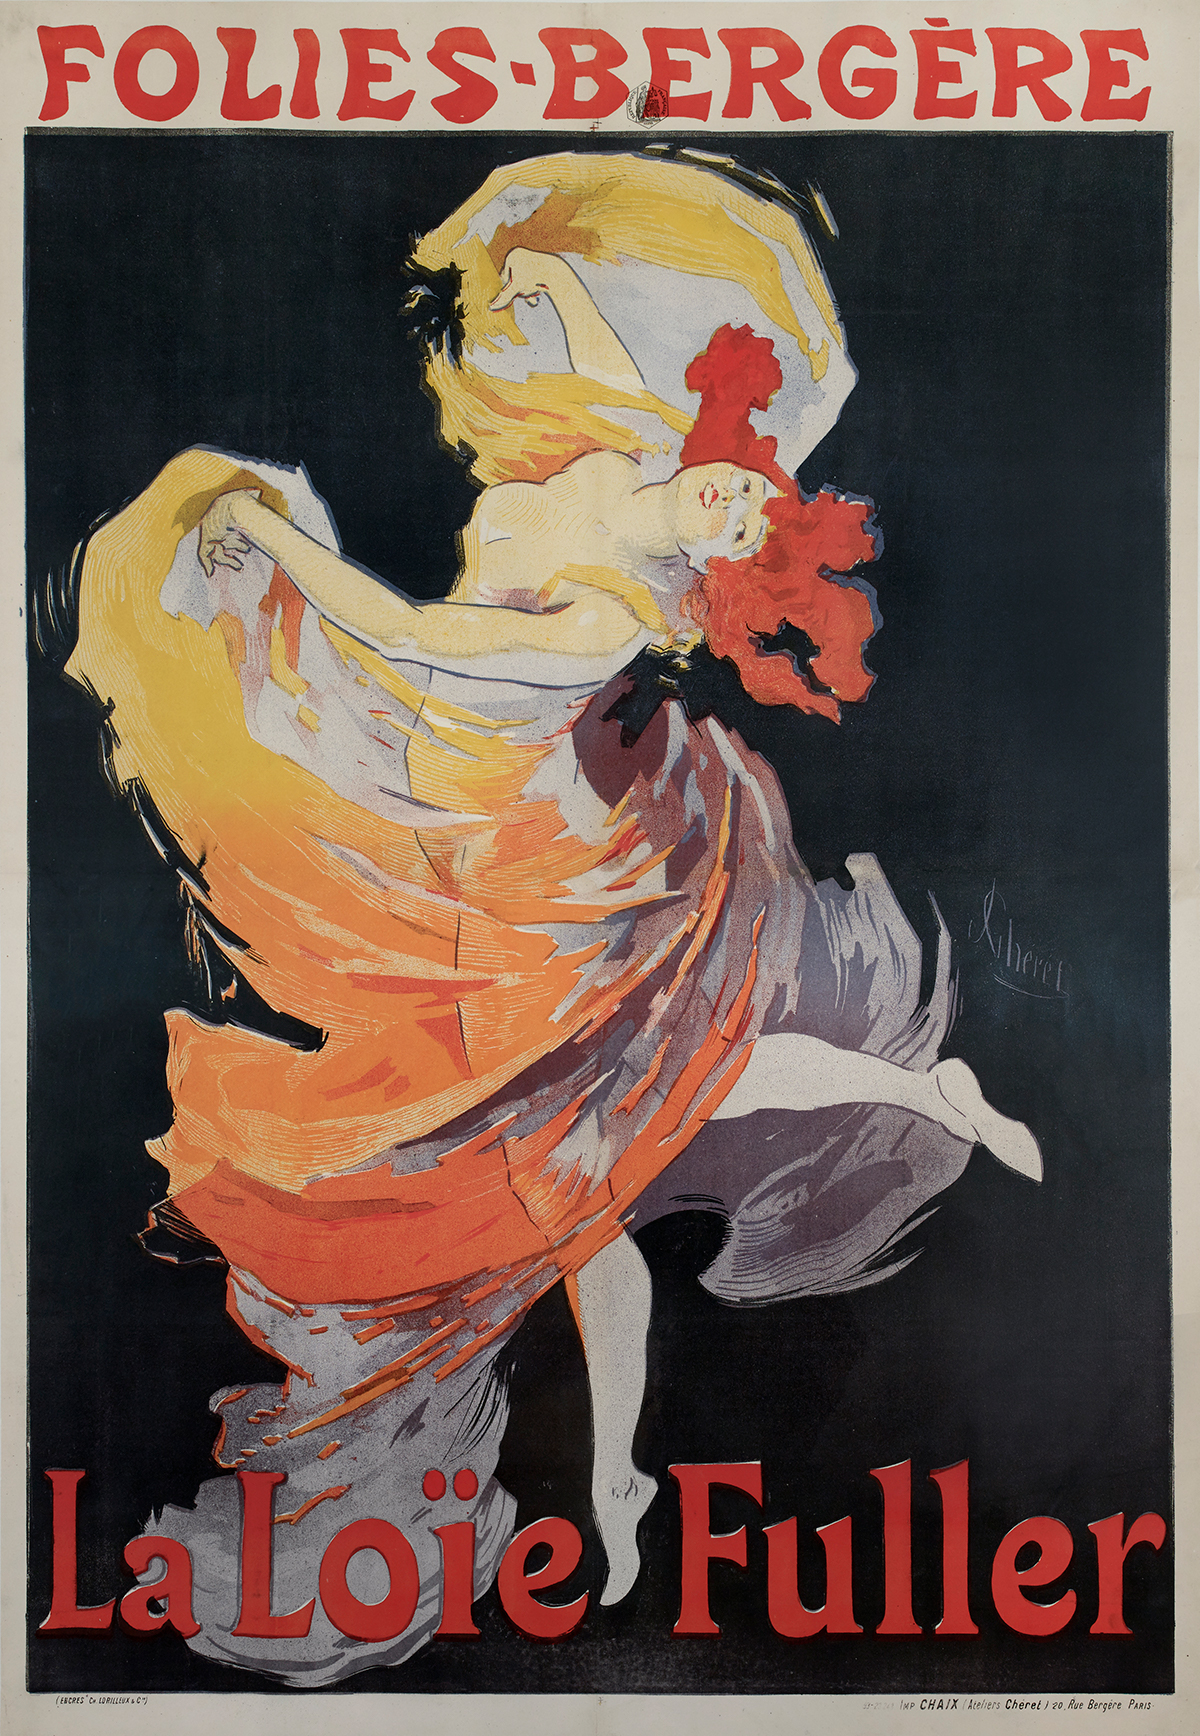 A woman dances in a performance advertisement.